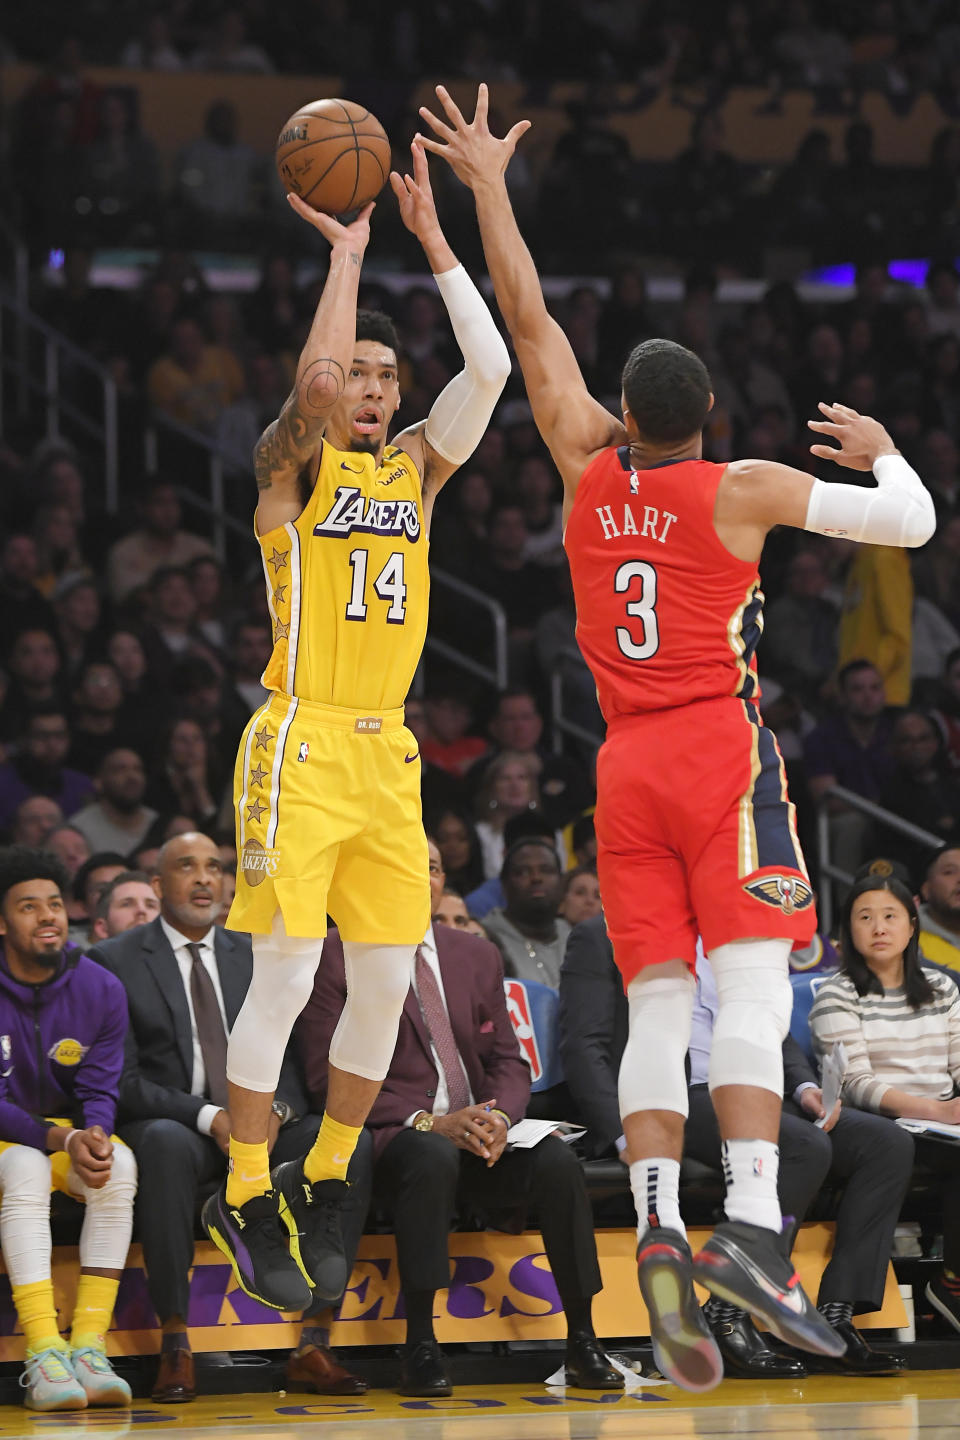 Los Angeles Lakers guard Danny Green, left, shoots as New Orleans Pelicans guard Josh Hart defends during the first half of an NBA basketball game Friday, Jan. 3, 2020, in Los Angeles. (AP Photo/Mark J. Terrill)